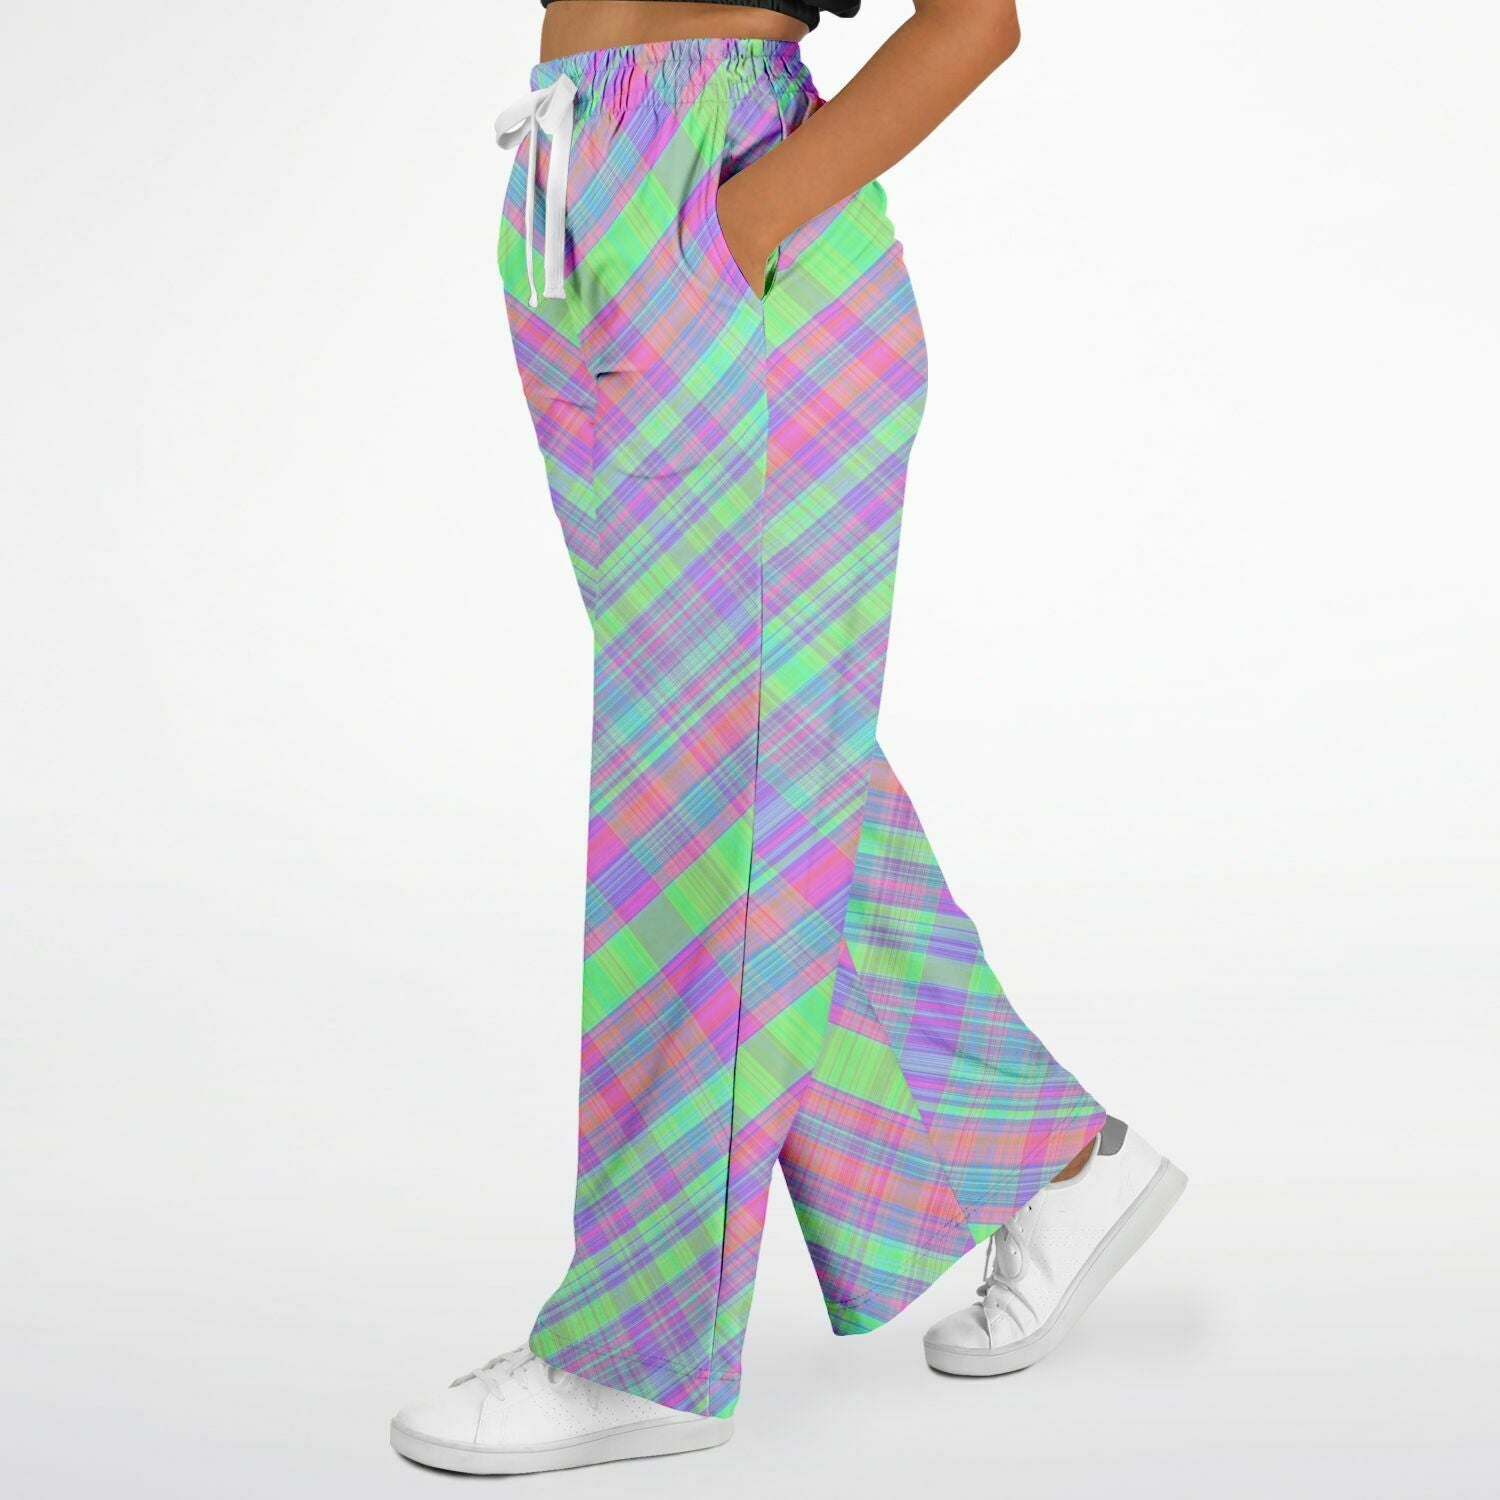 Fun and Colourful pants for Balloon Twisters